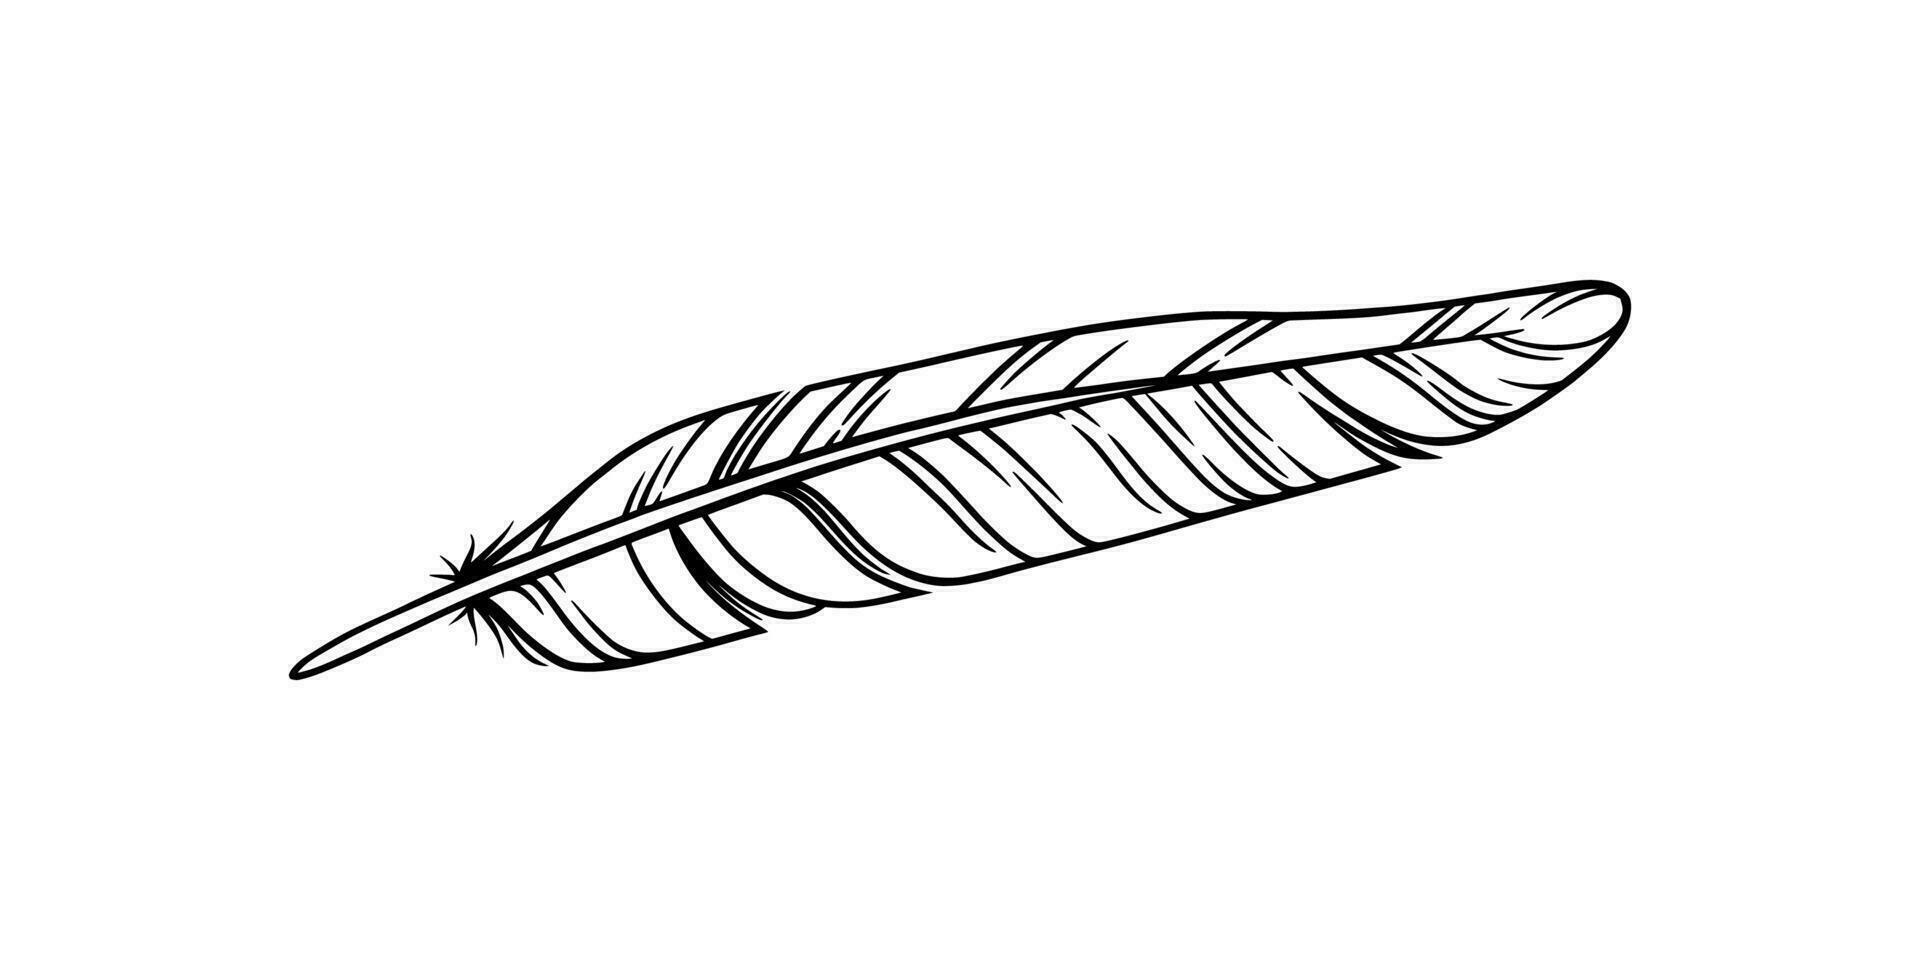 Bird feather for a quill. Sketch feather illustration for a tattoo design. Vector illustration